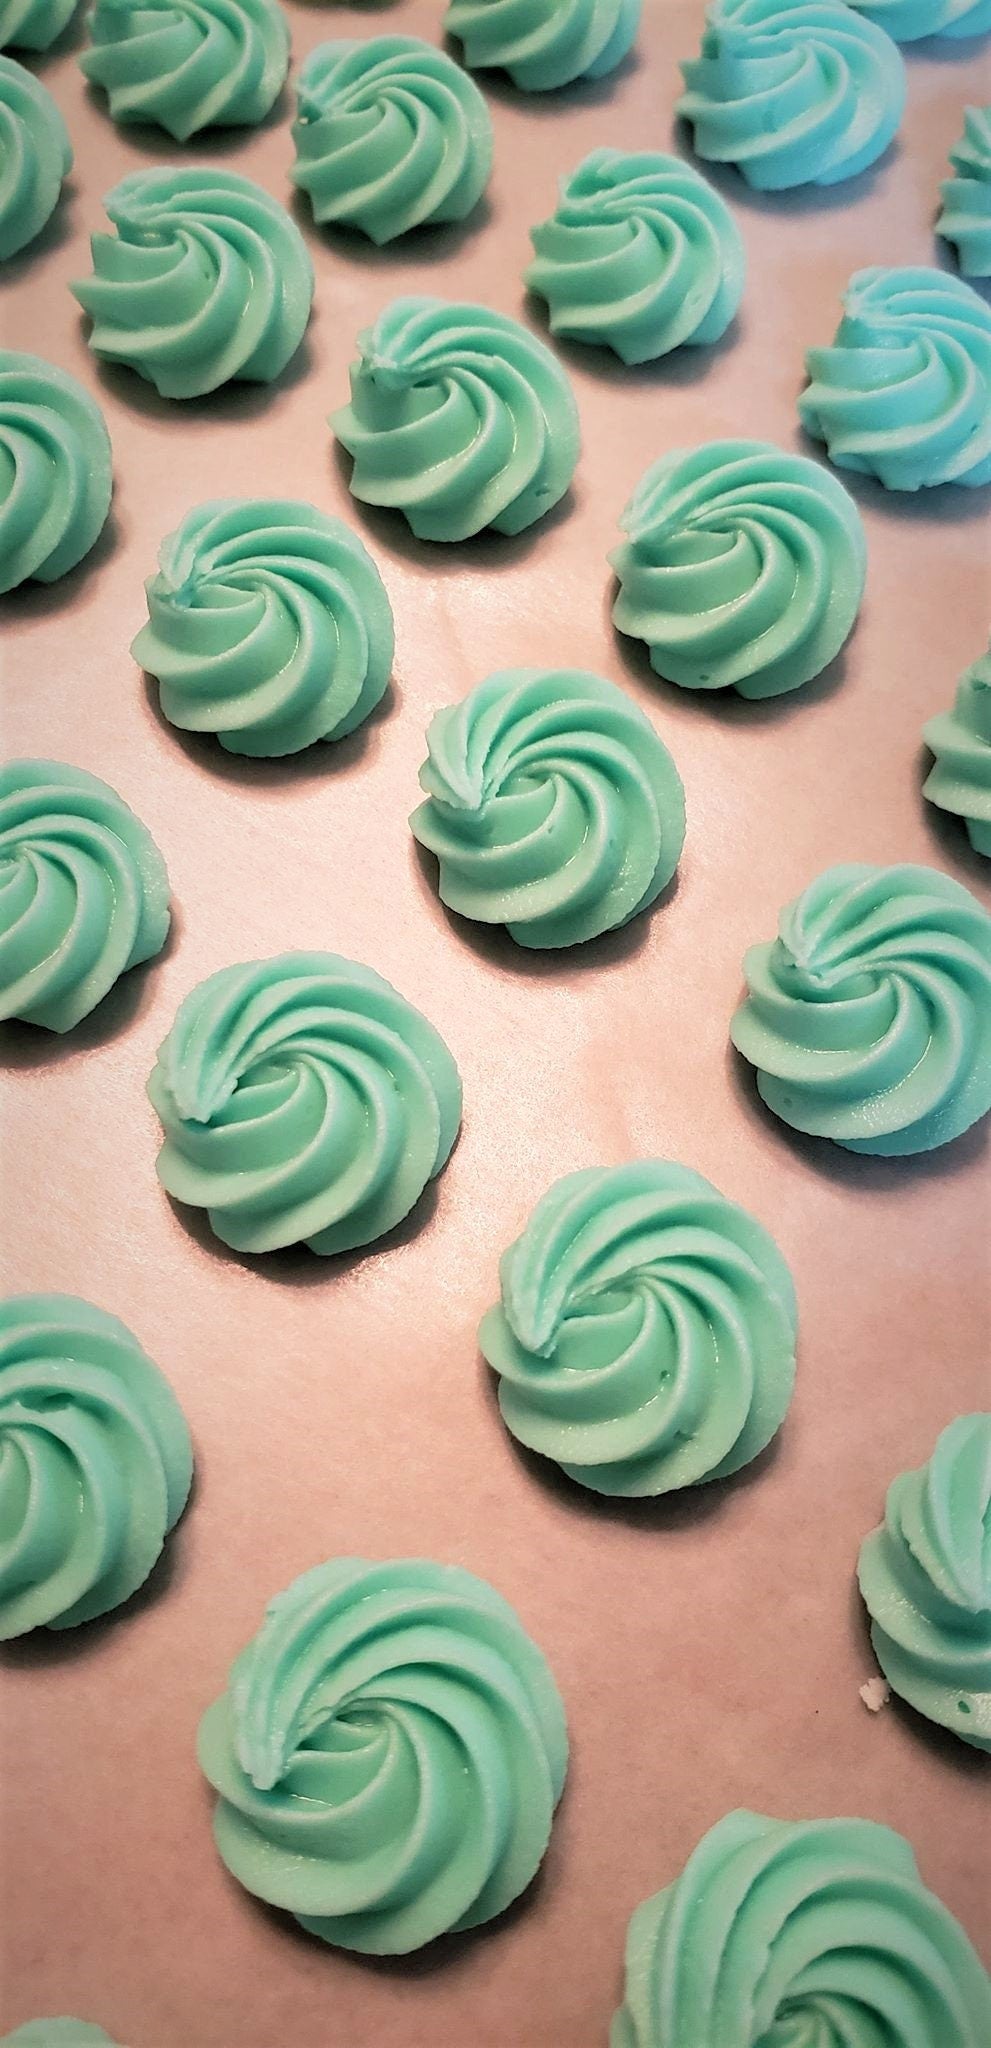 Royal Icing Recipe, The Perfect Royal Icing Recipe, Bonus Tutorial, How to Make Royal Icing Flowers